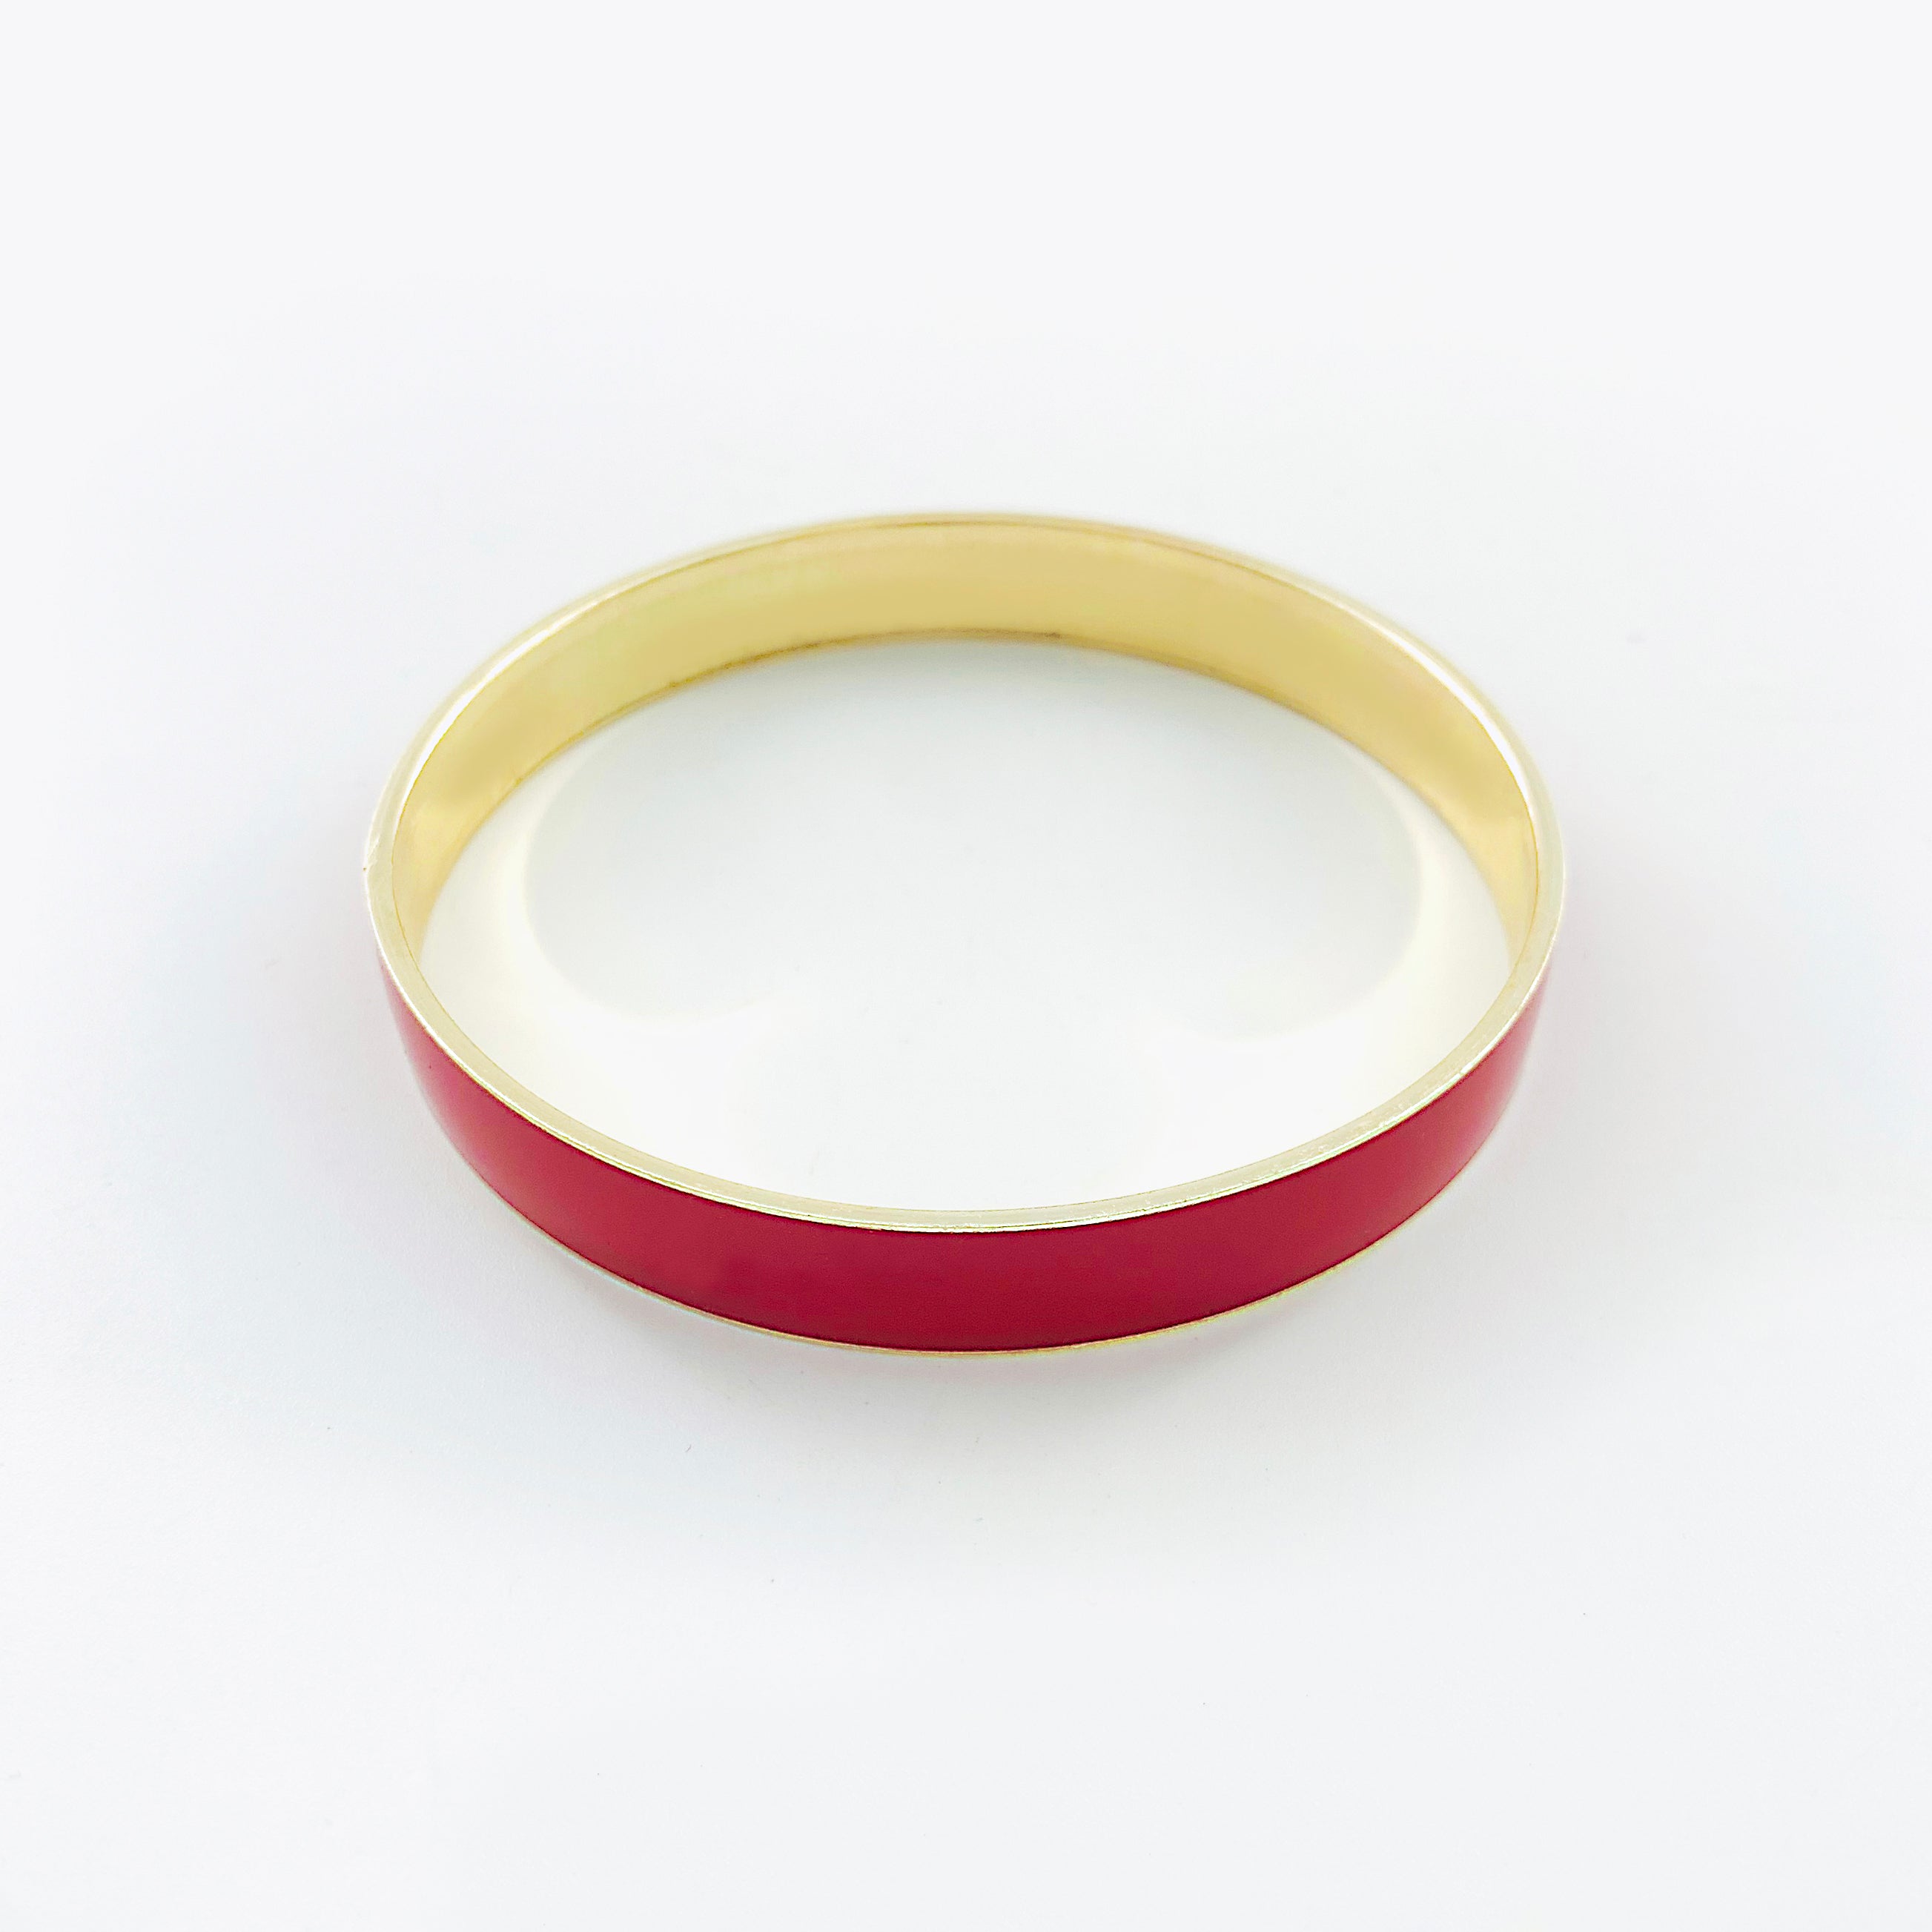 Red and gold bangle with enamel finish